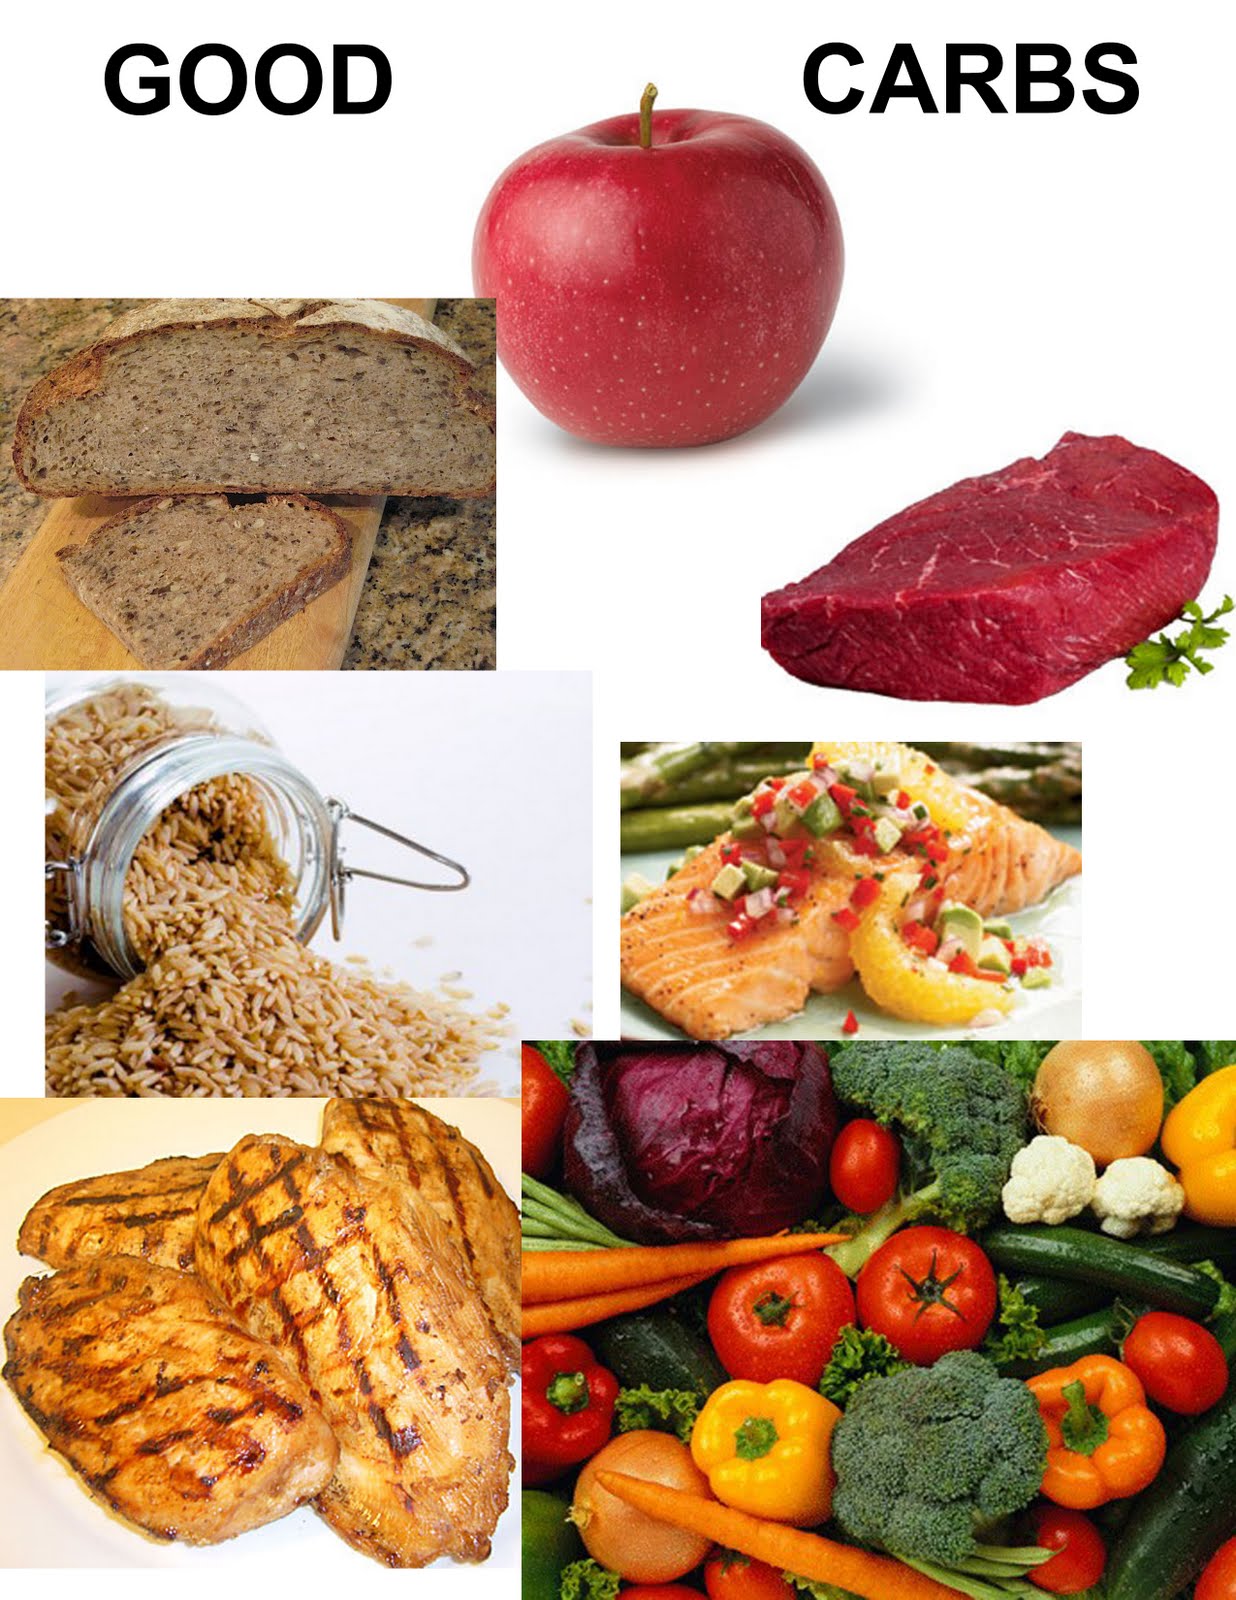 Dr. Mark's Health Tips: The facts about carbohydrates